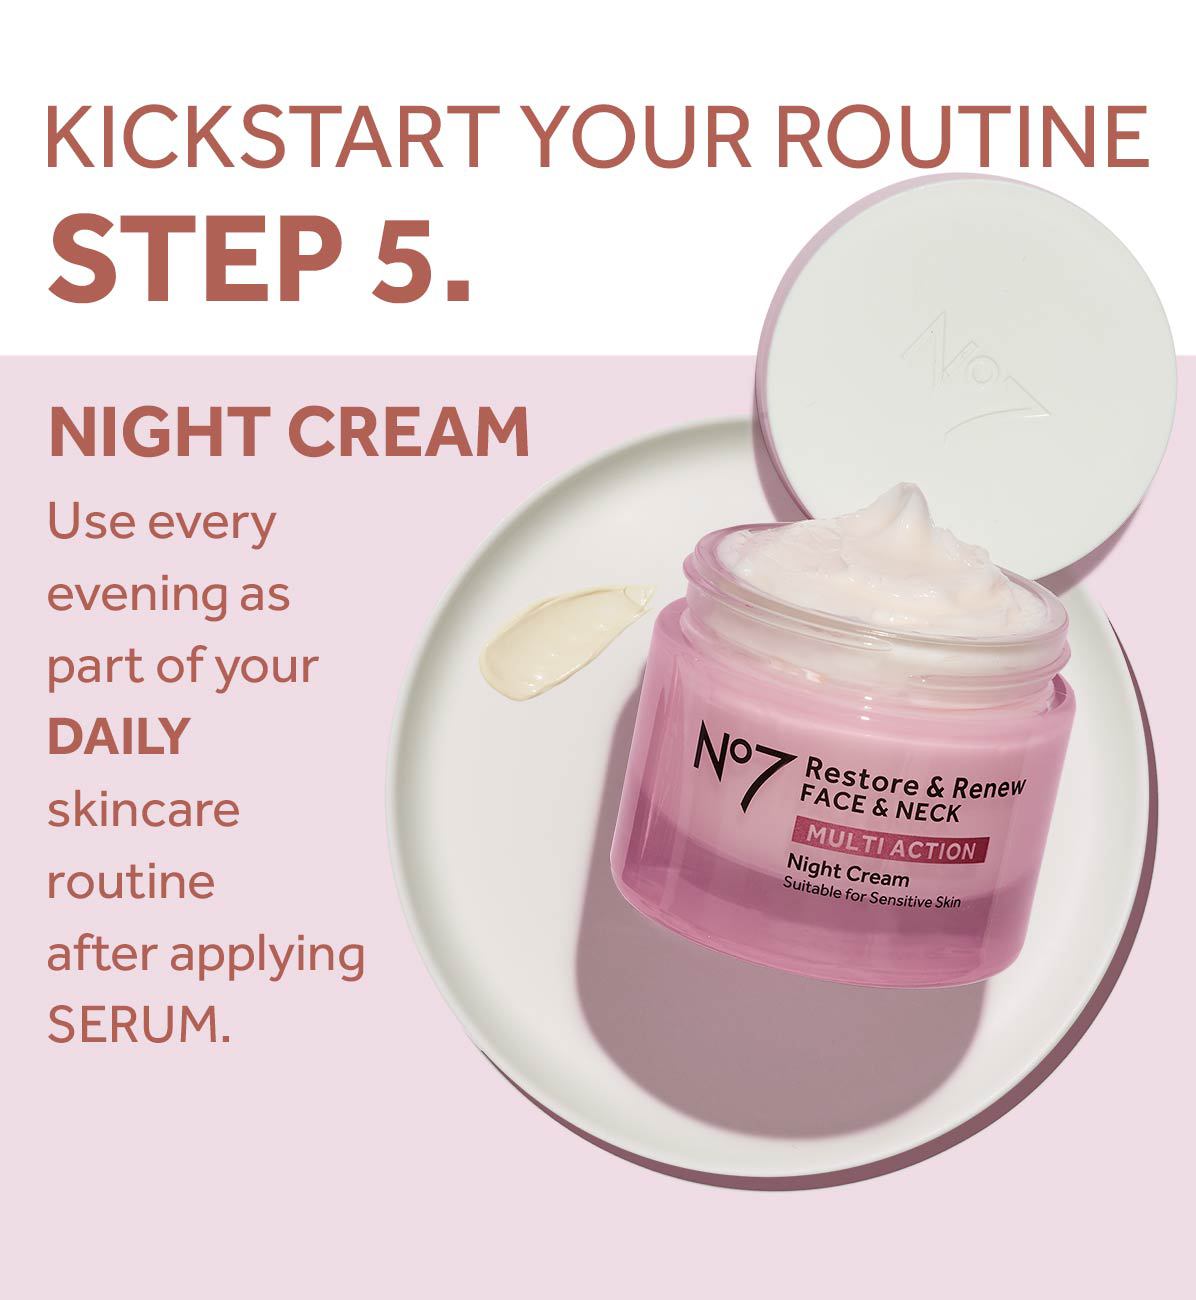 KICKSTART YOUR ROUTINESTEP 5.NIGHT CREAMUse every evening as part of yourDAILYskincare routineafter applyingSERUM.